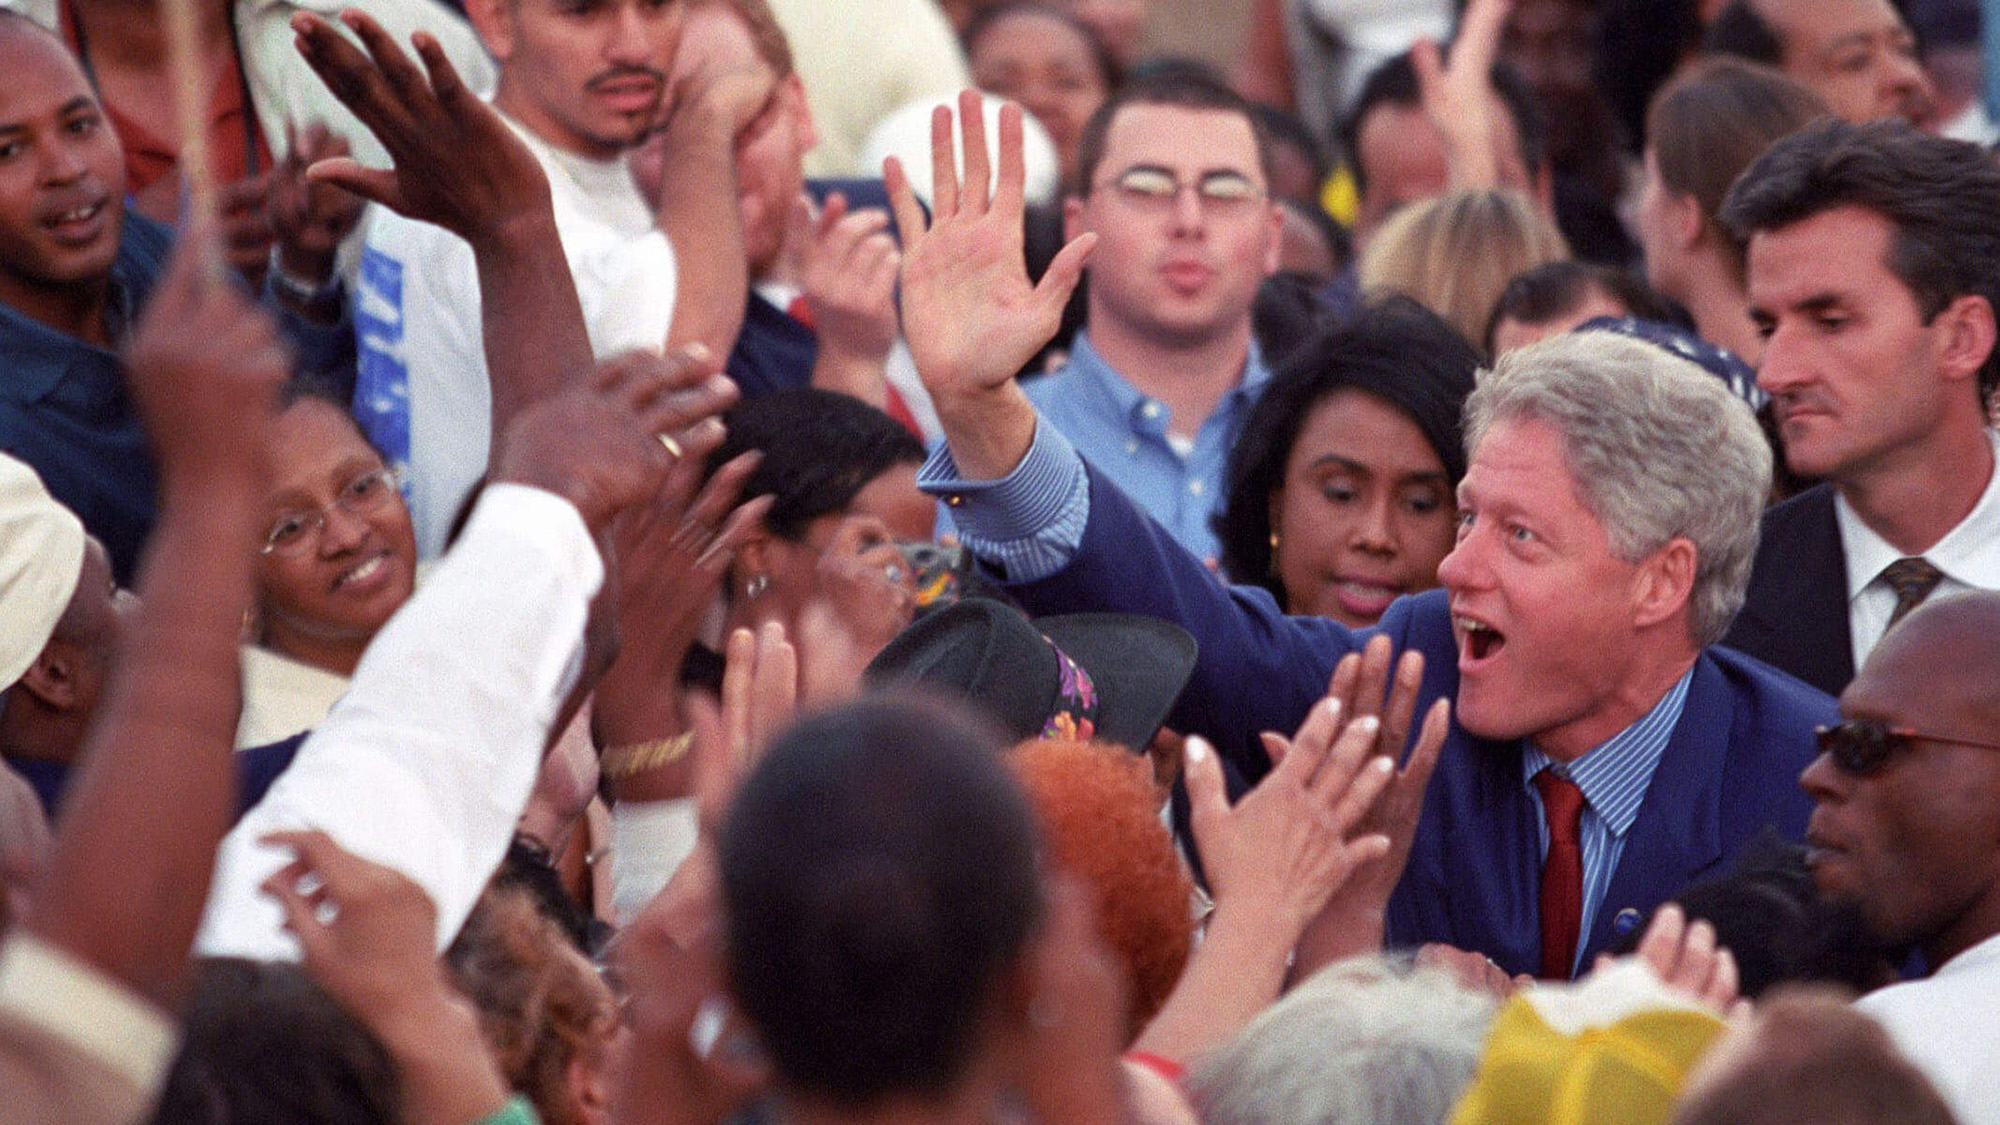 Bill Clinton giving supporters a high five.